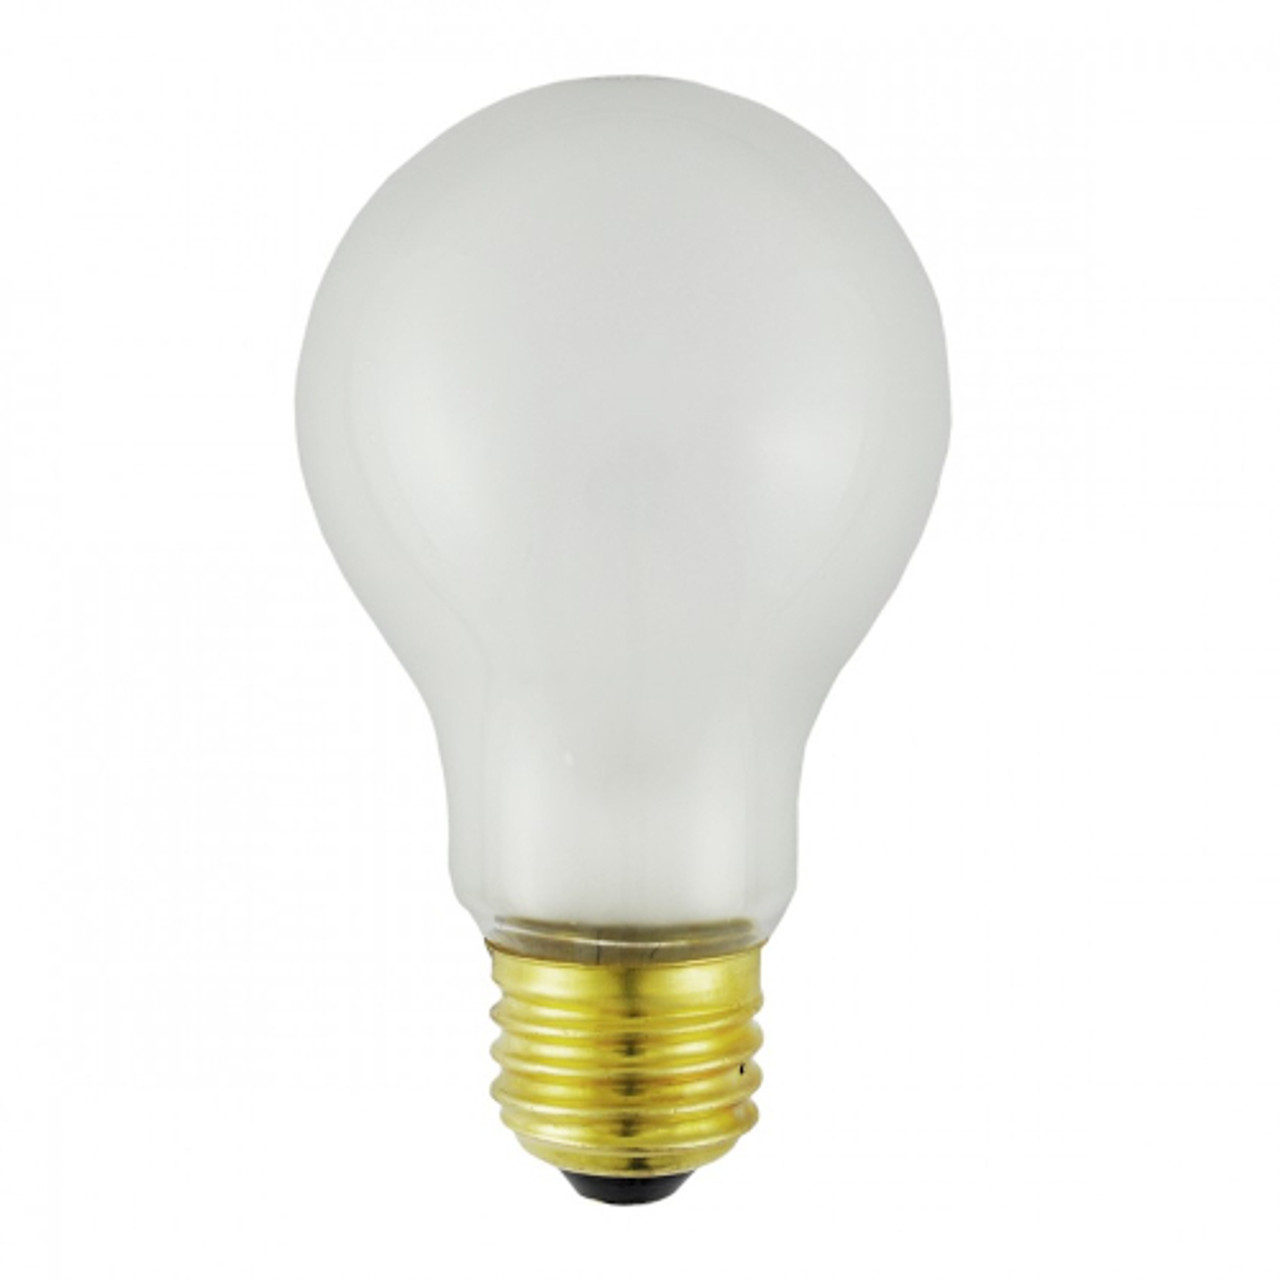 Bulb, Light - 60W/130V - Replacement Part For Henny Penny BL01-004